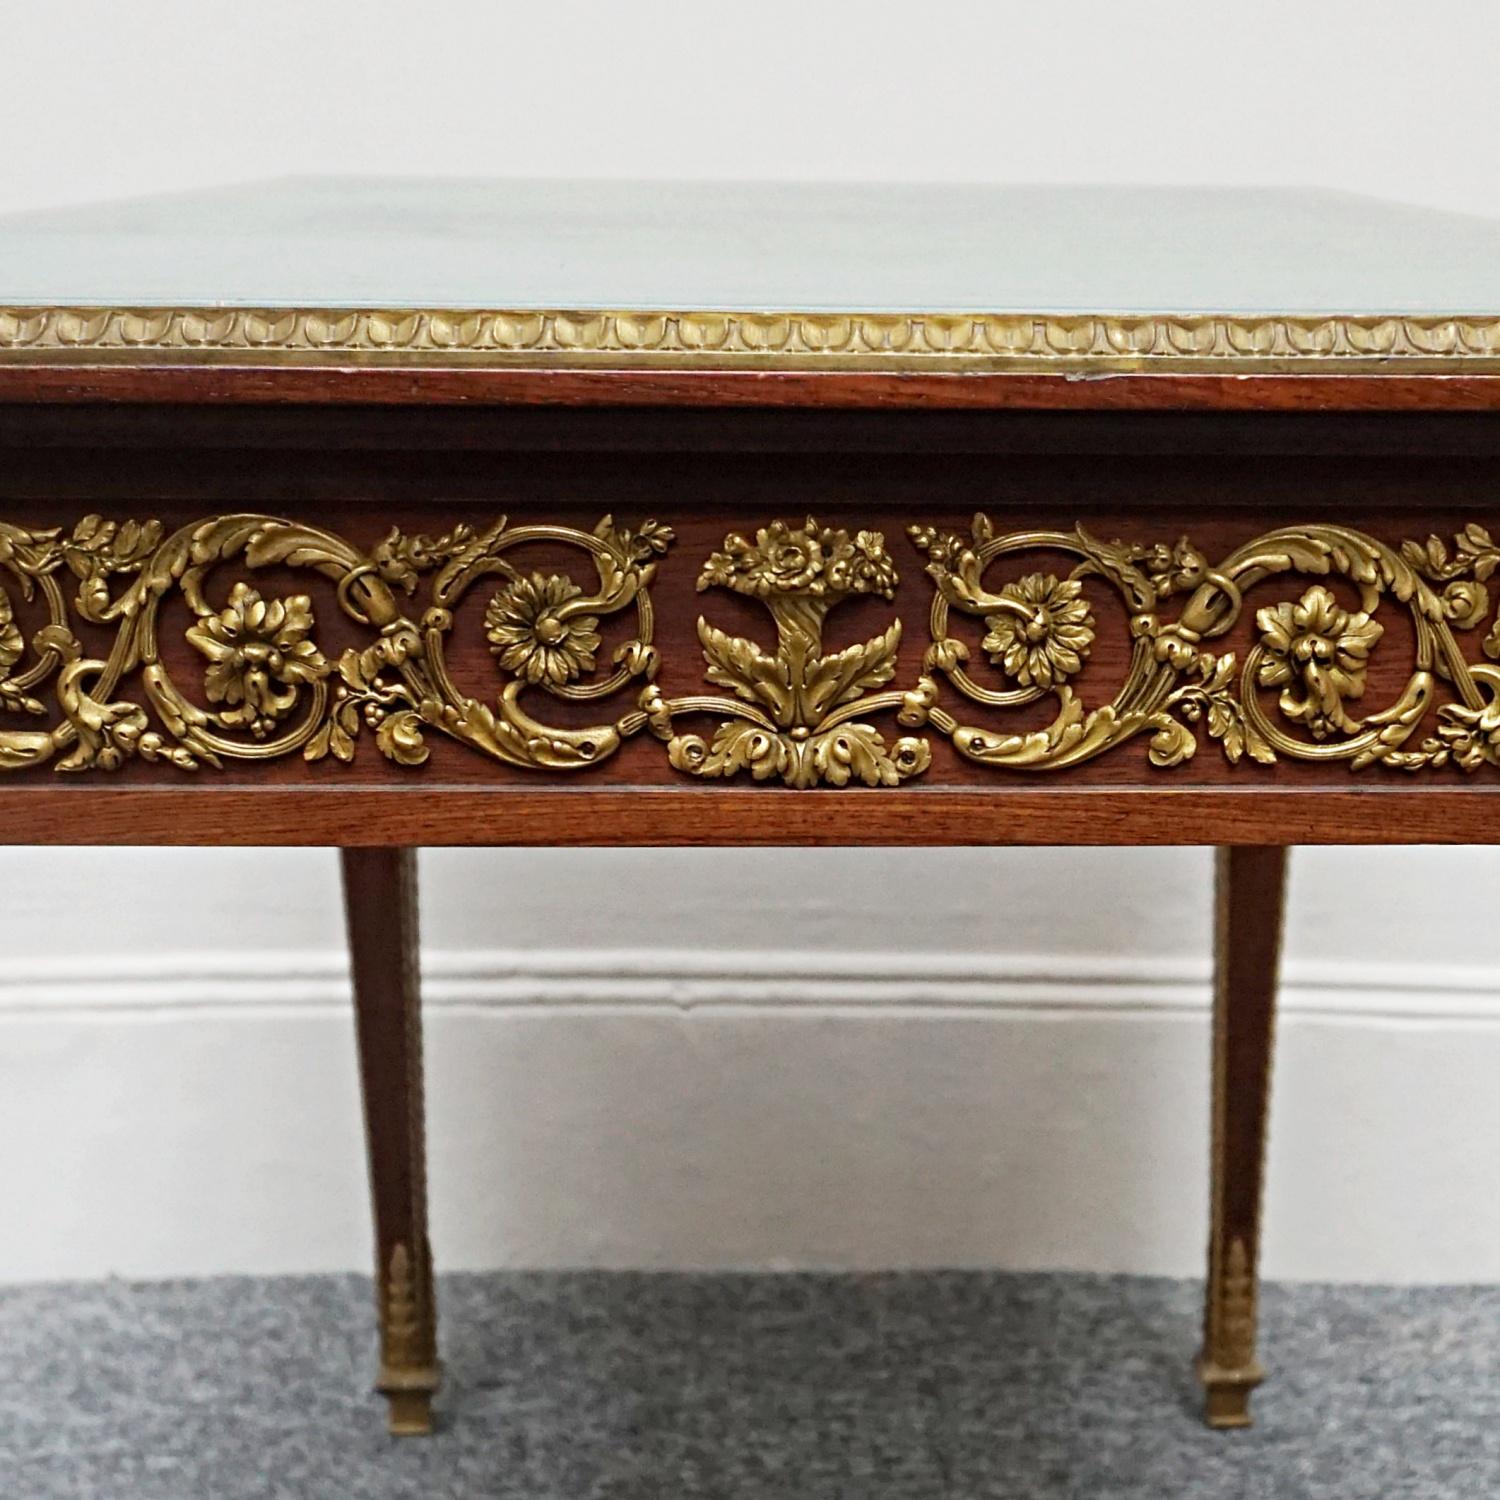 Louis XVI Style Gilt-Bronze Mounted Kingwood Writing Table by Francois Linke For Sale 14